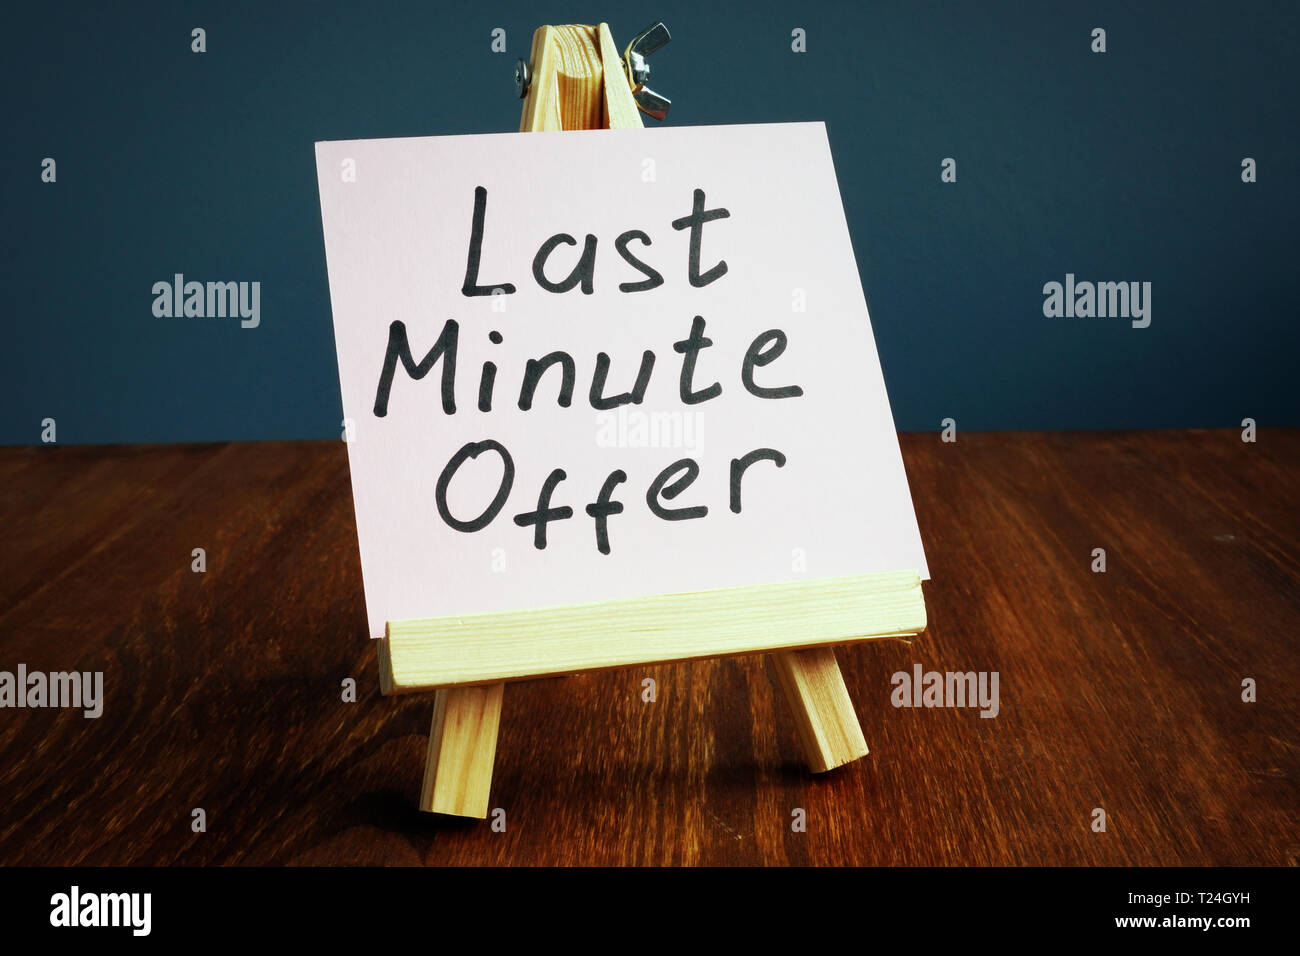 Last minute offer written on piece of paper. Stock Photo